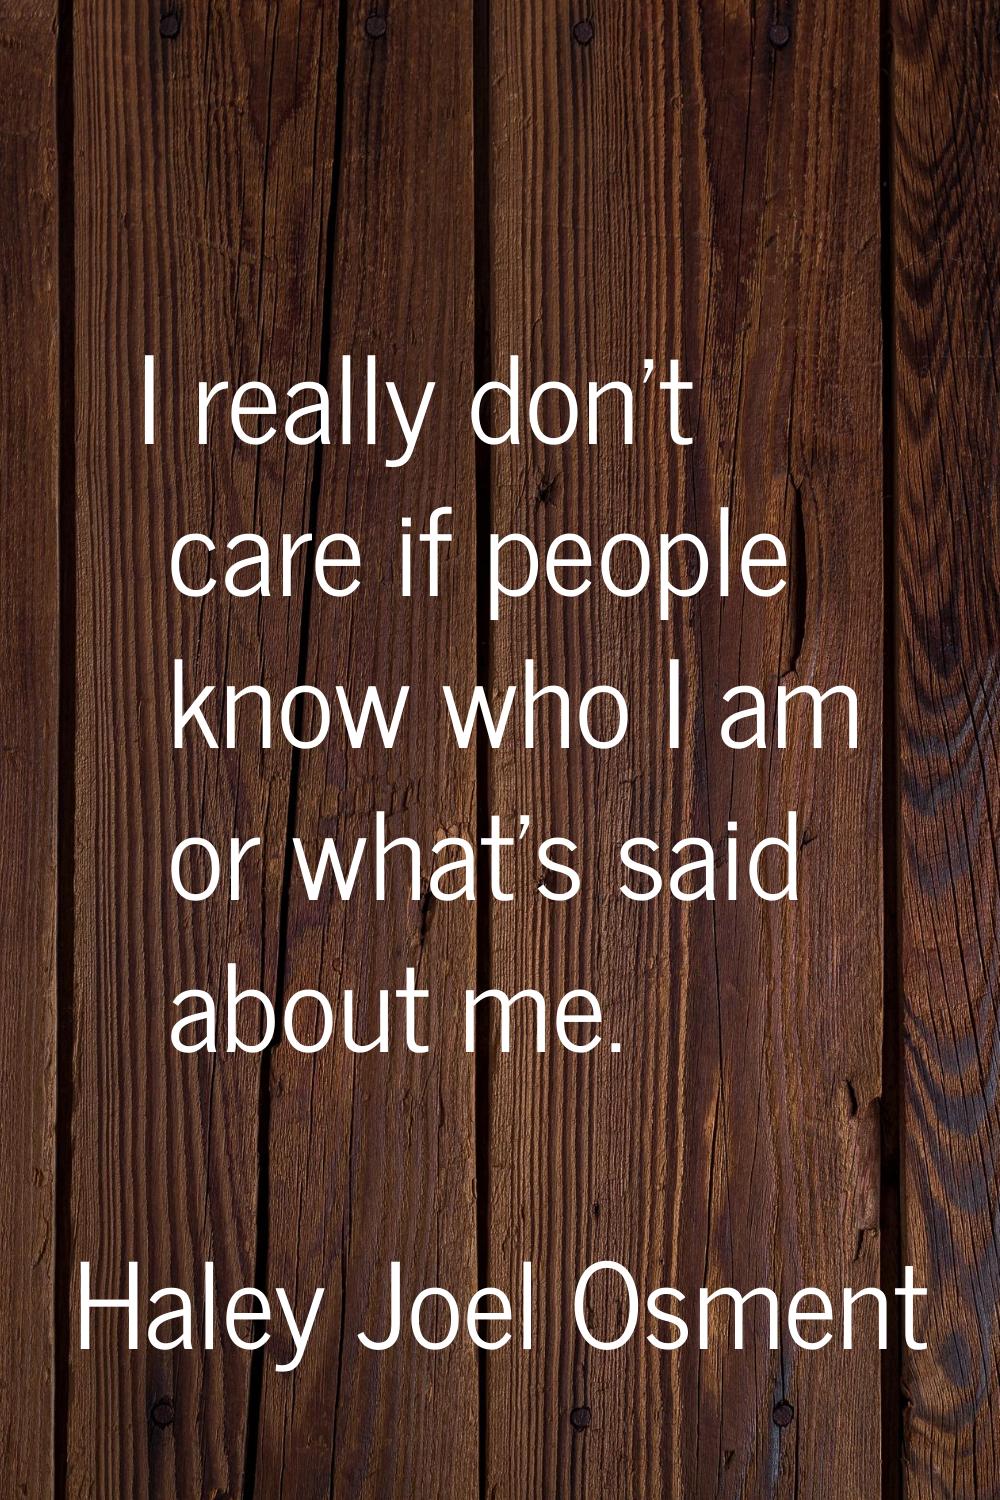 I really don't care if people know who I am or what's said about me.